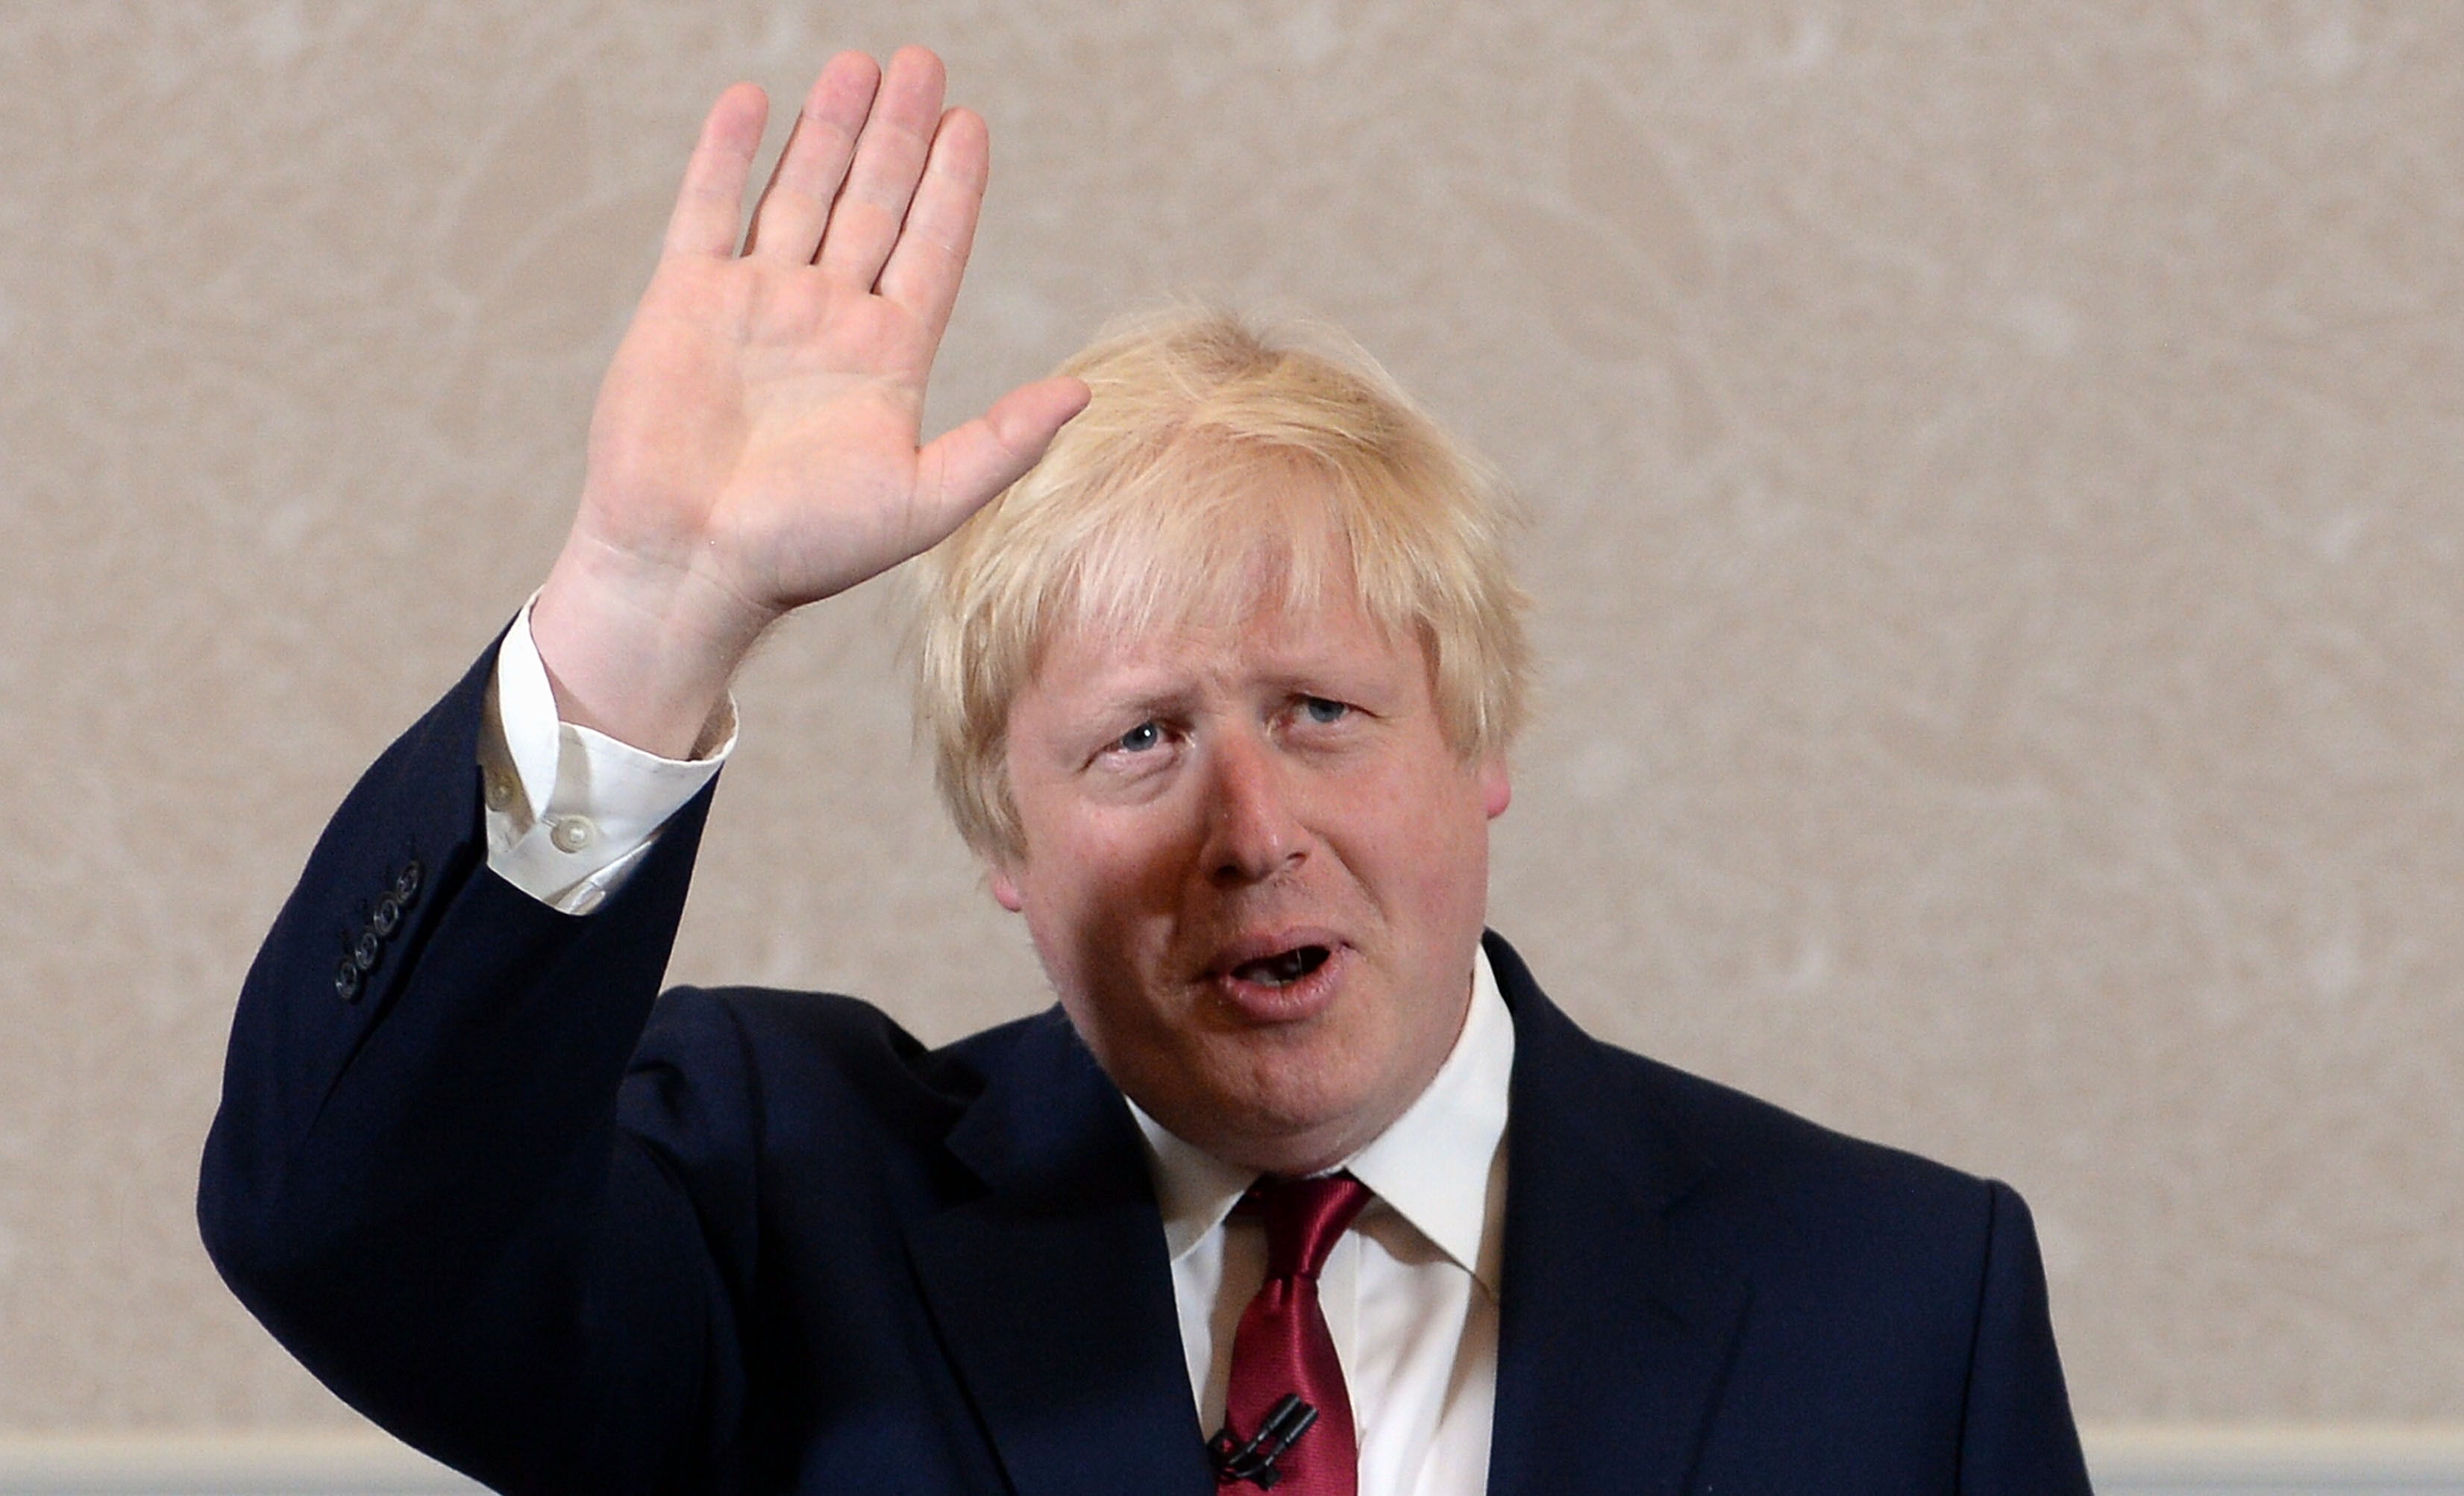 Boris Johnson speaks during a press conference at St Ermin's Hotel in London